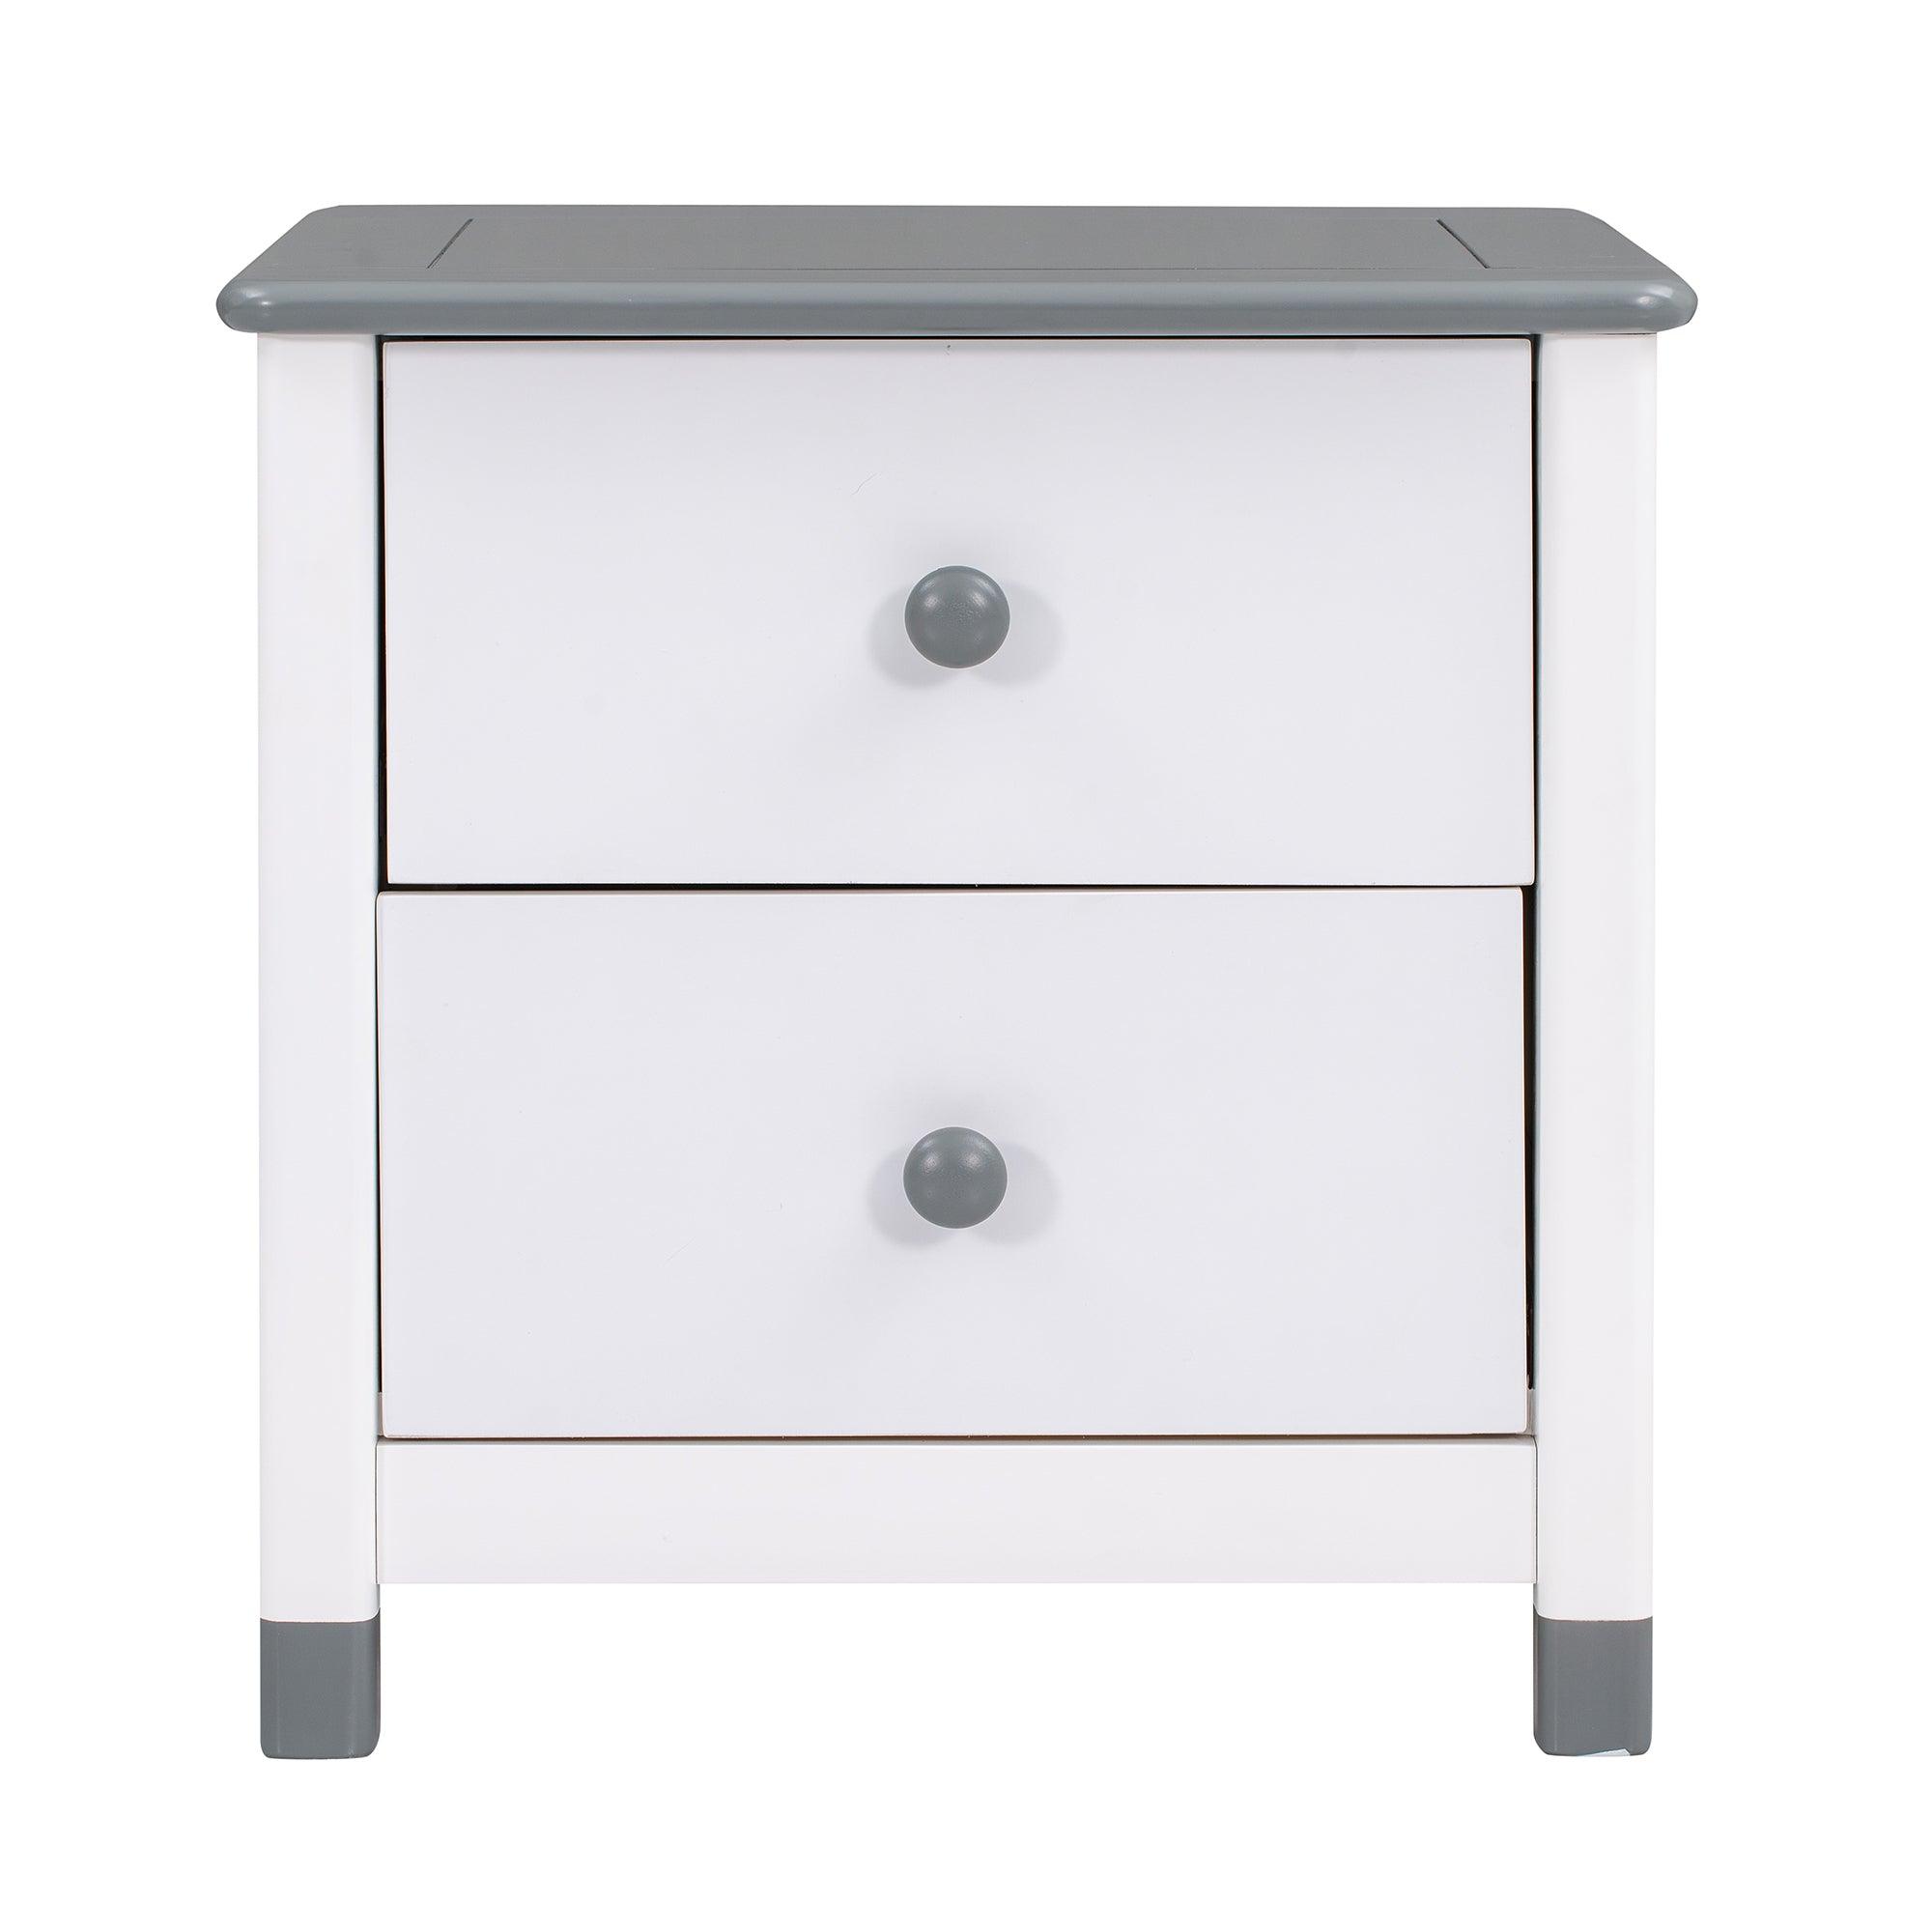 FATASTIC Wooden Nightstand with Two Drawers for Kids Bedroom - White & Gray